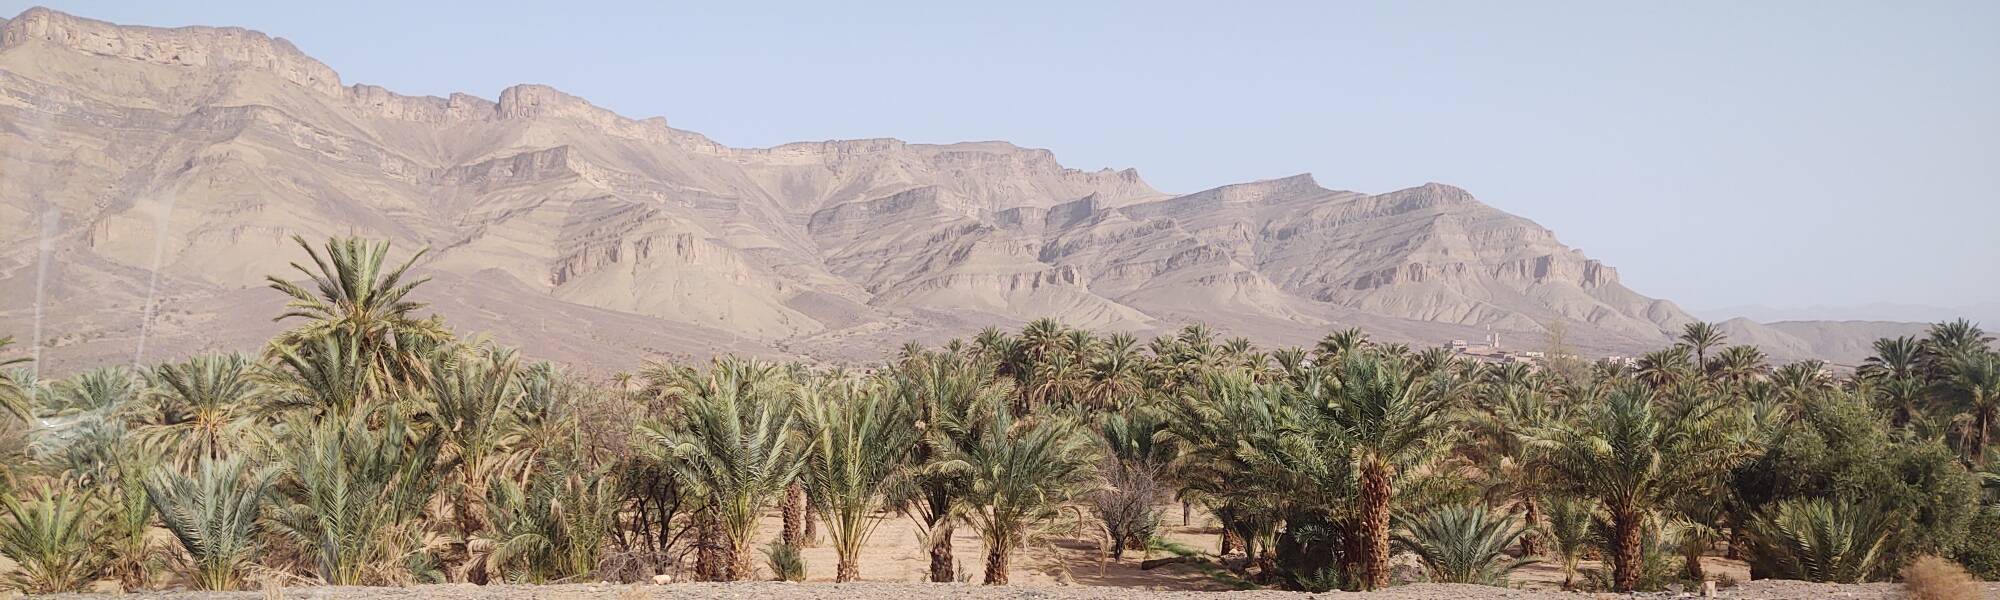 Date palm oasis in the Draa Wadi north of Zagora.